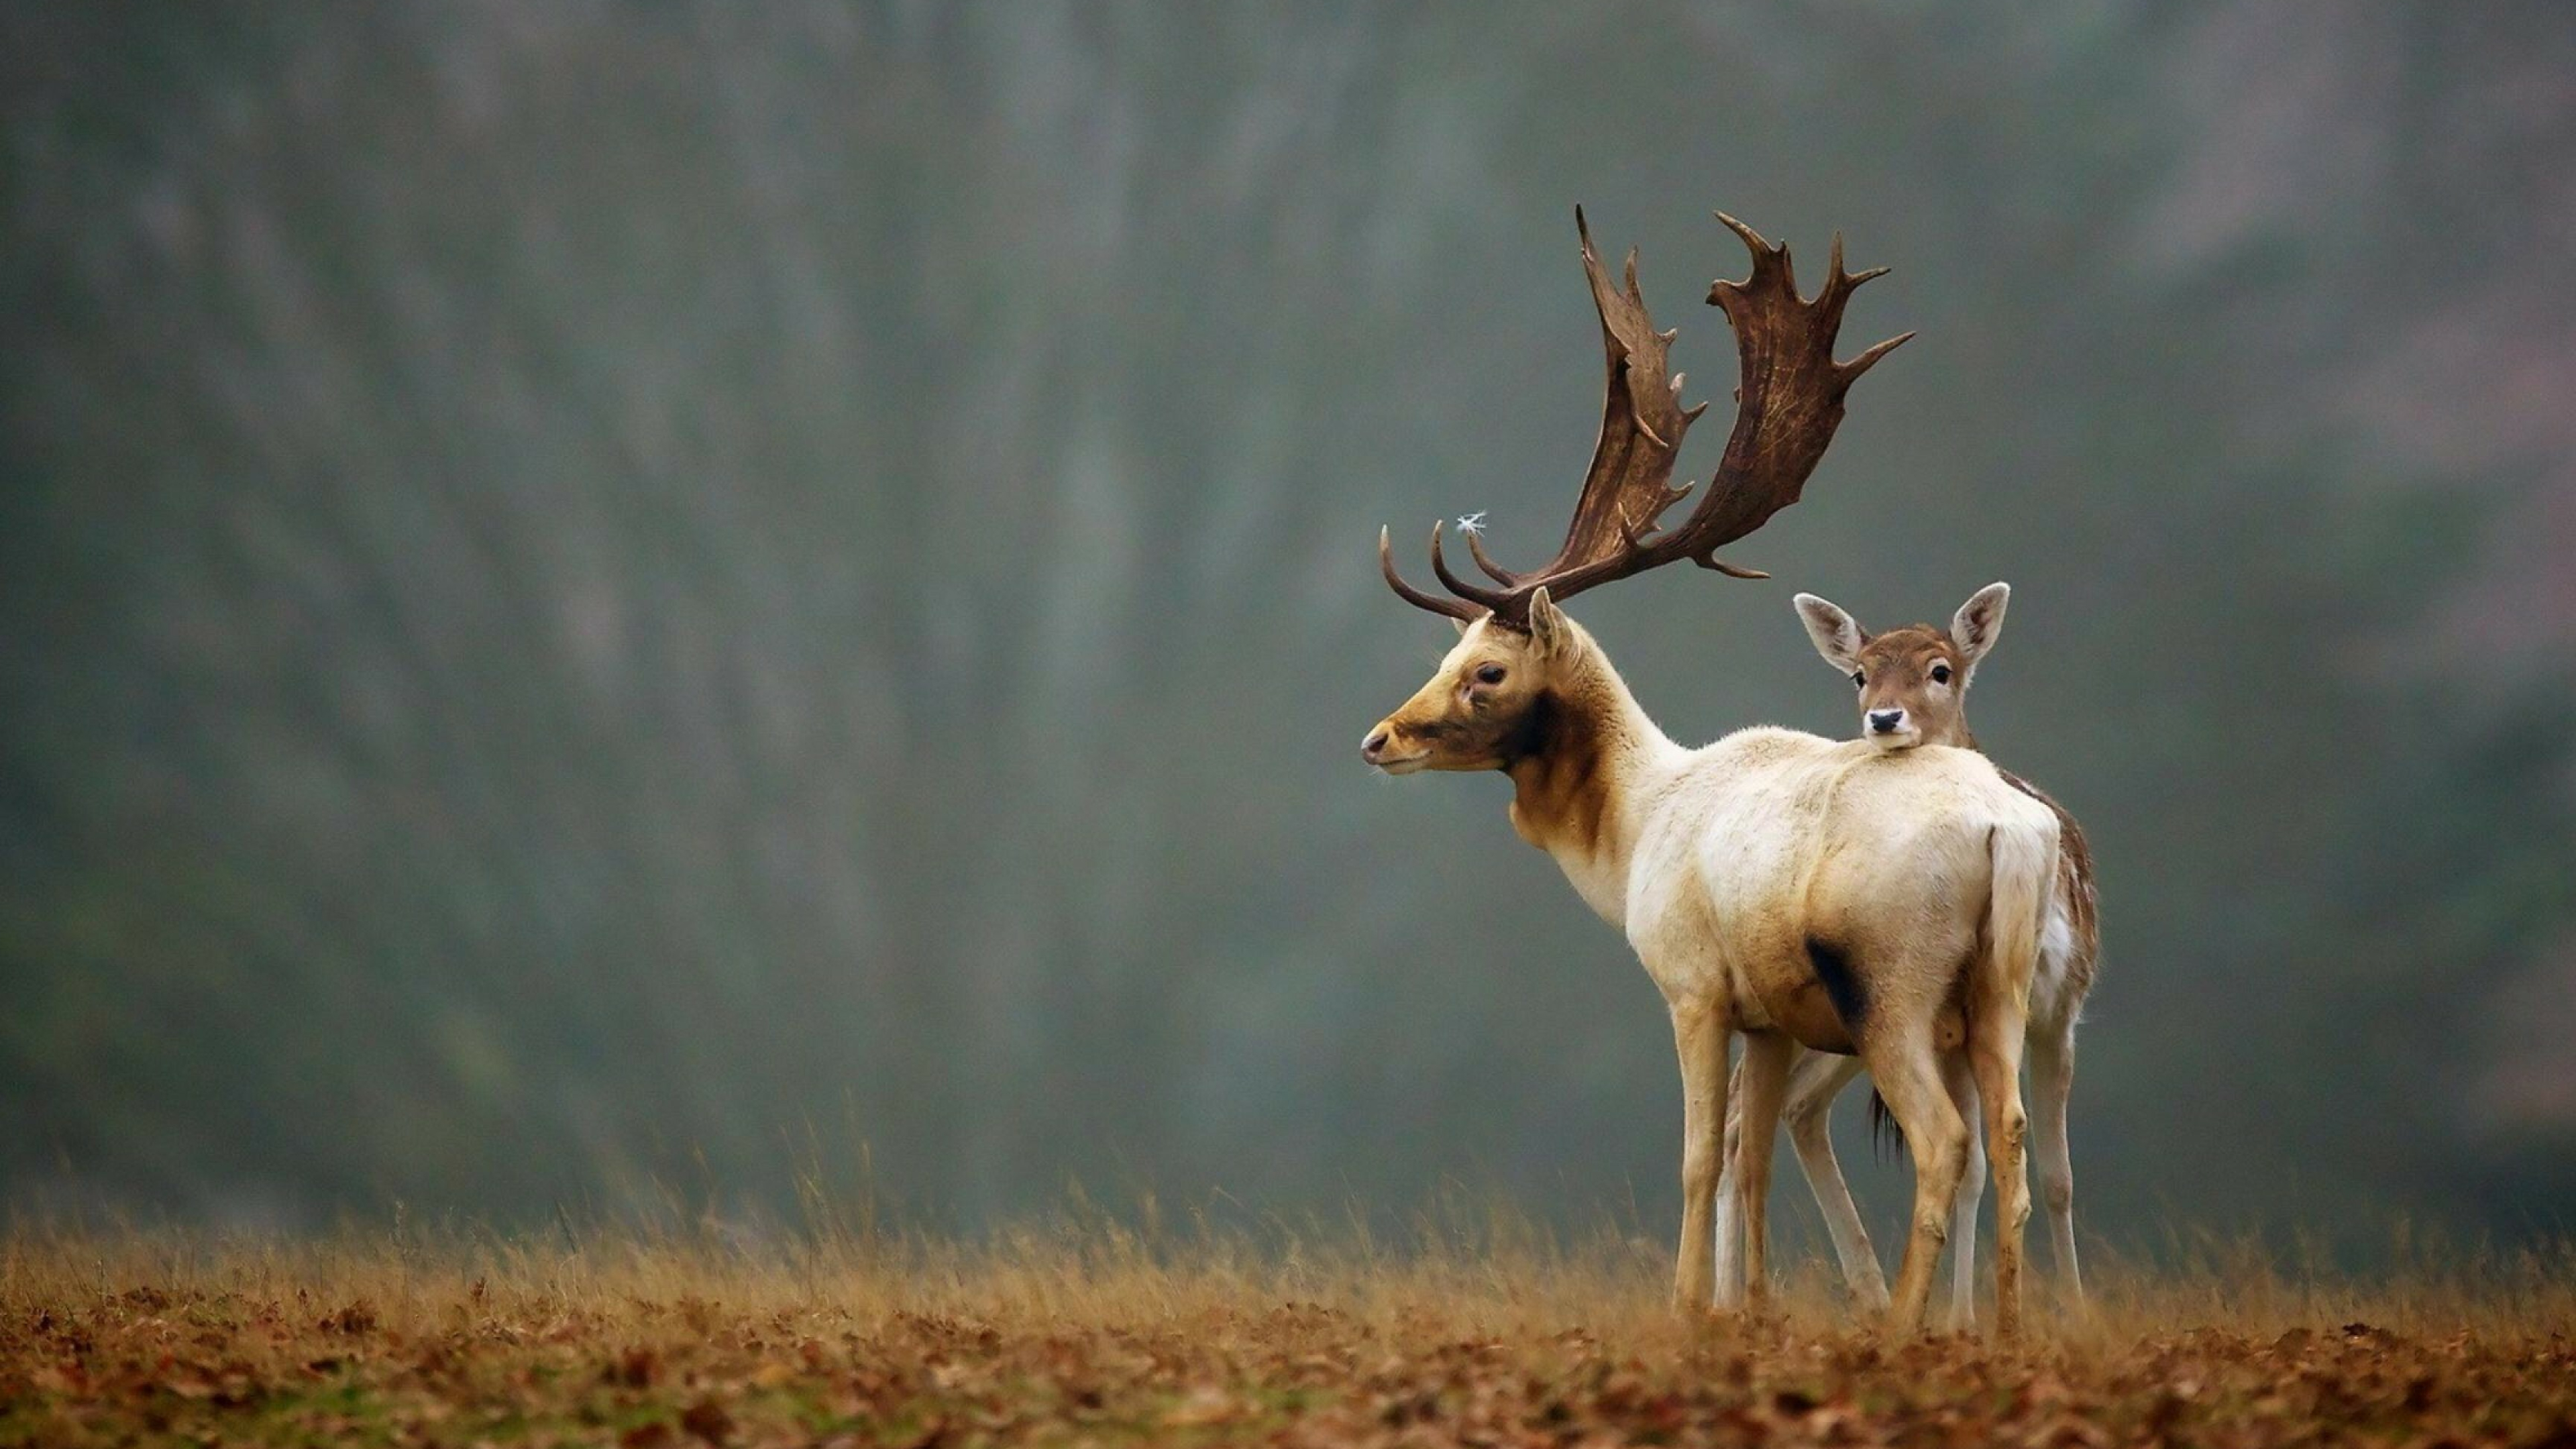 Reindeer: Cute animals, Autumn, The boreal woodland caribou lives in the northeastern Canada. 3840x2160 4K Wallpaper.